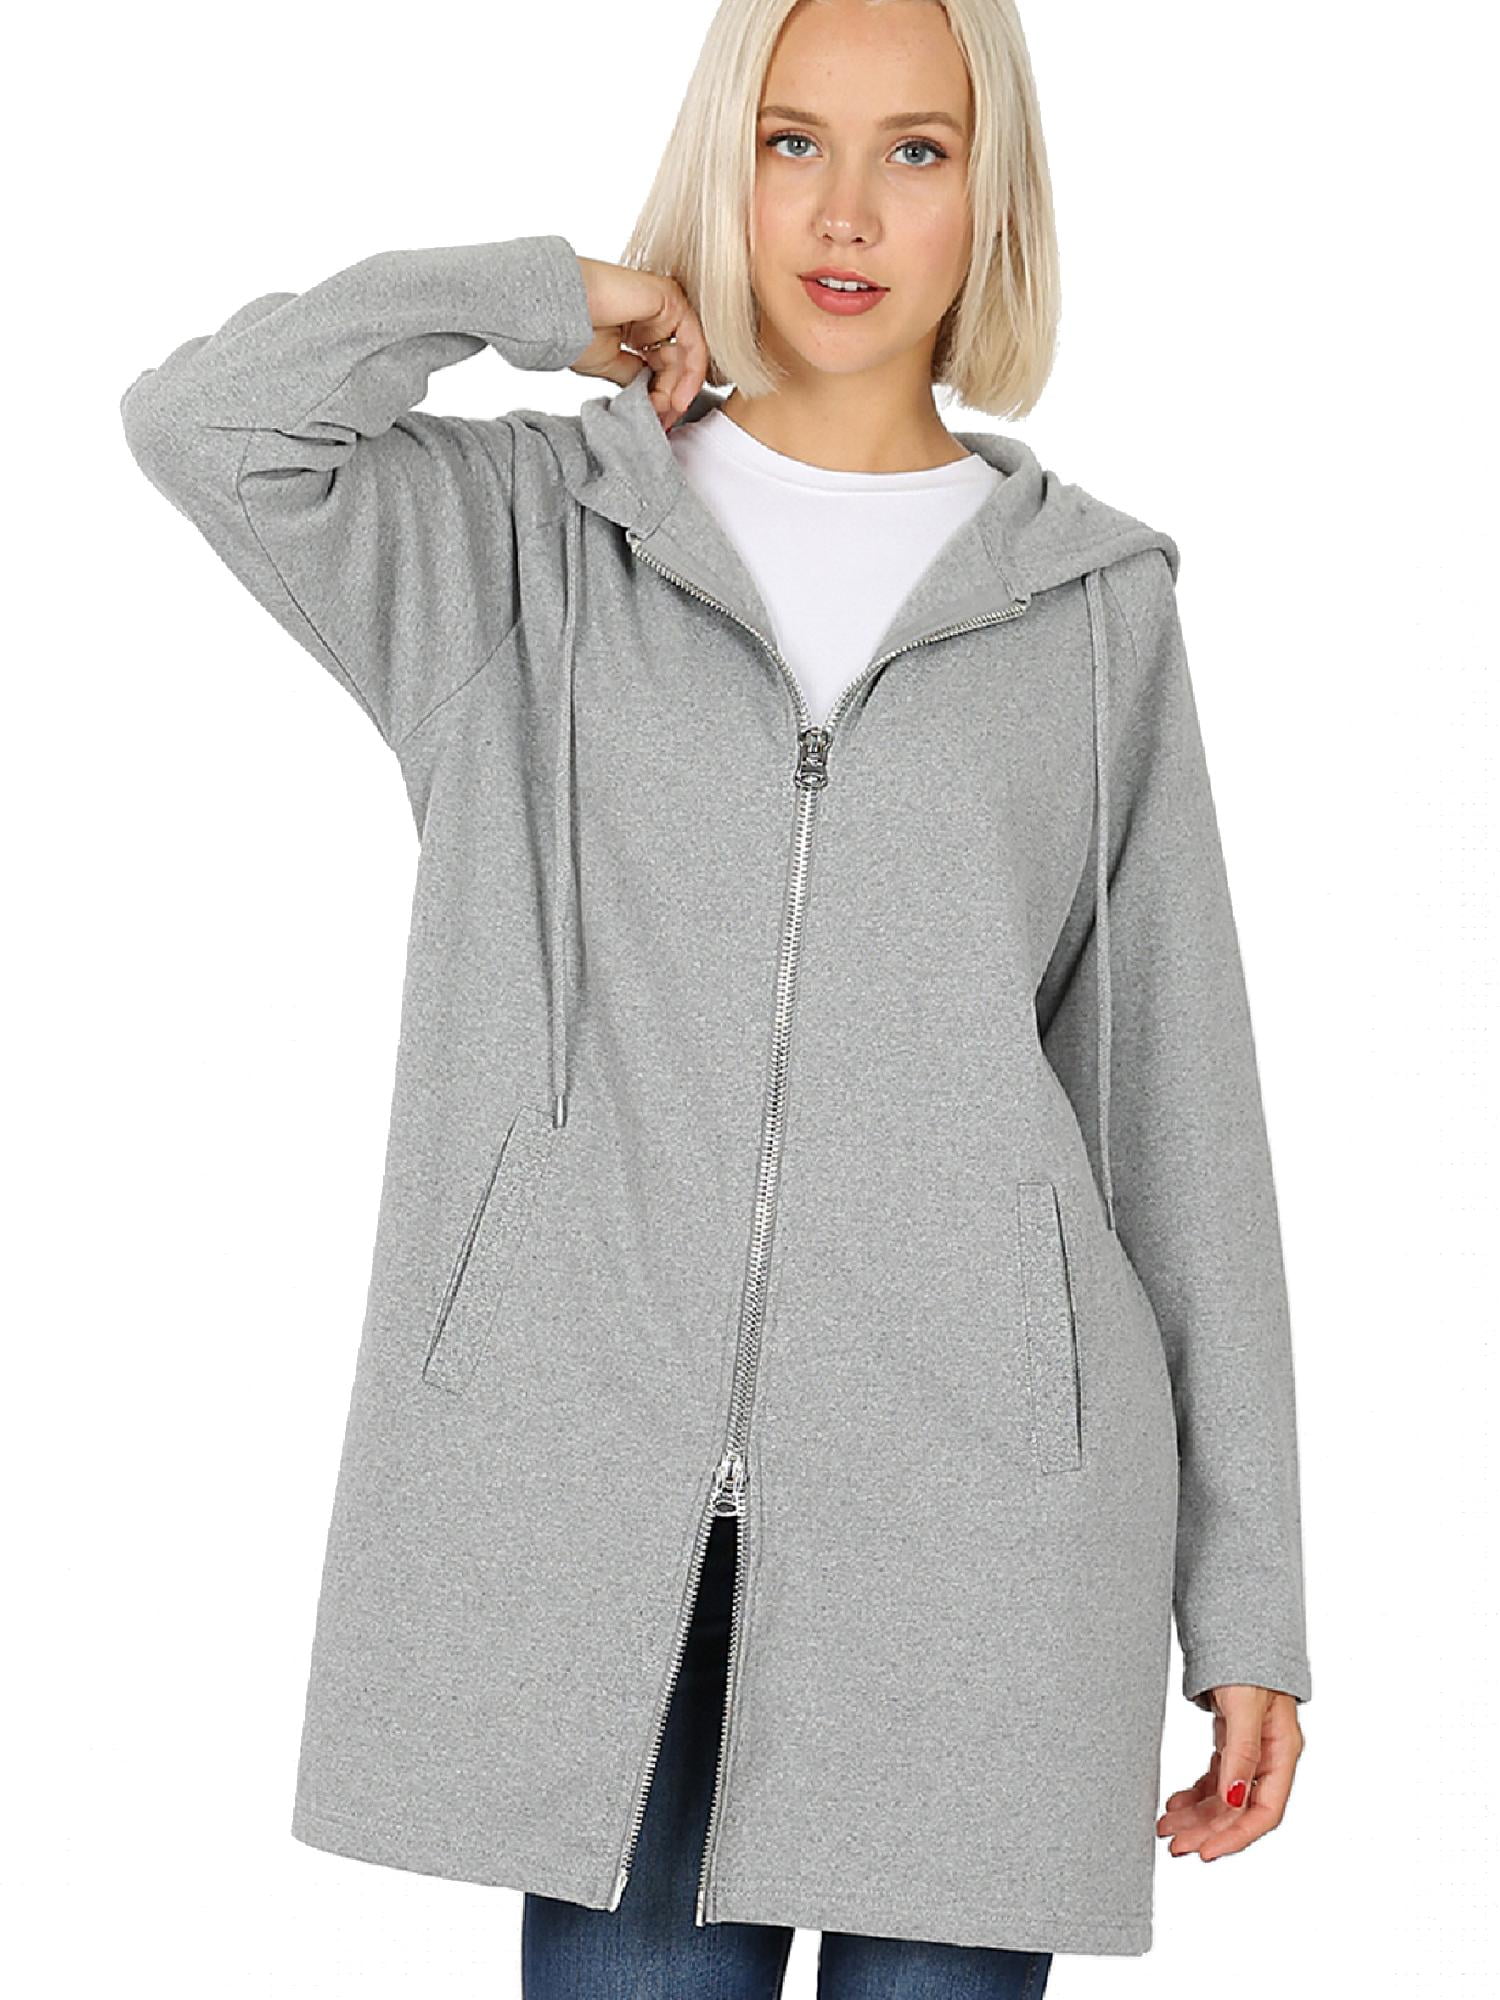 MixMatchy Women's Casual Oversized Loose Fit Long Sleeve Zip Up ...